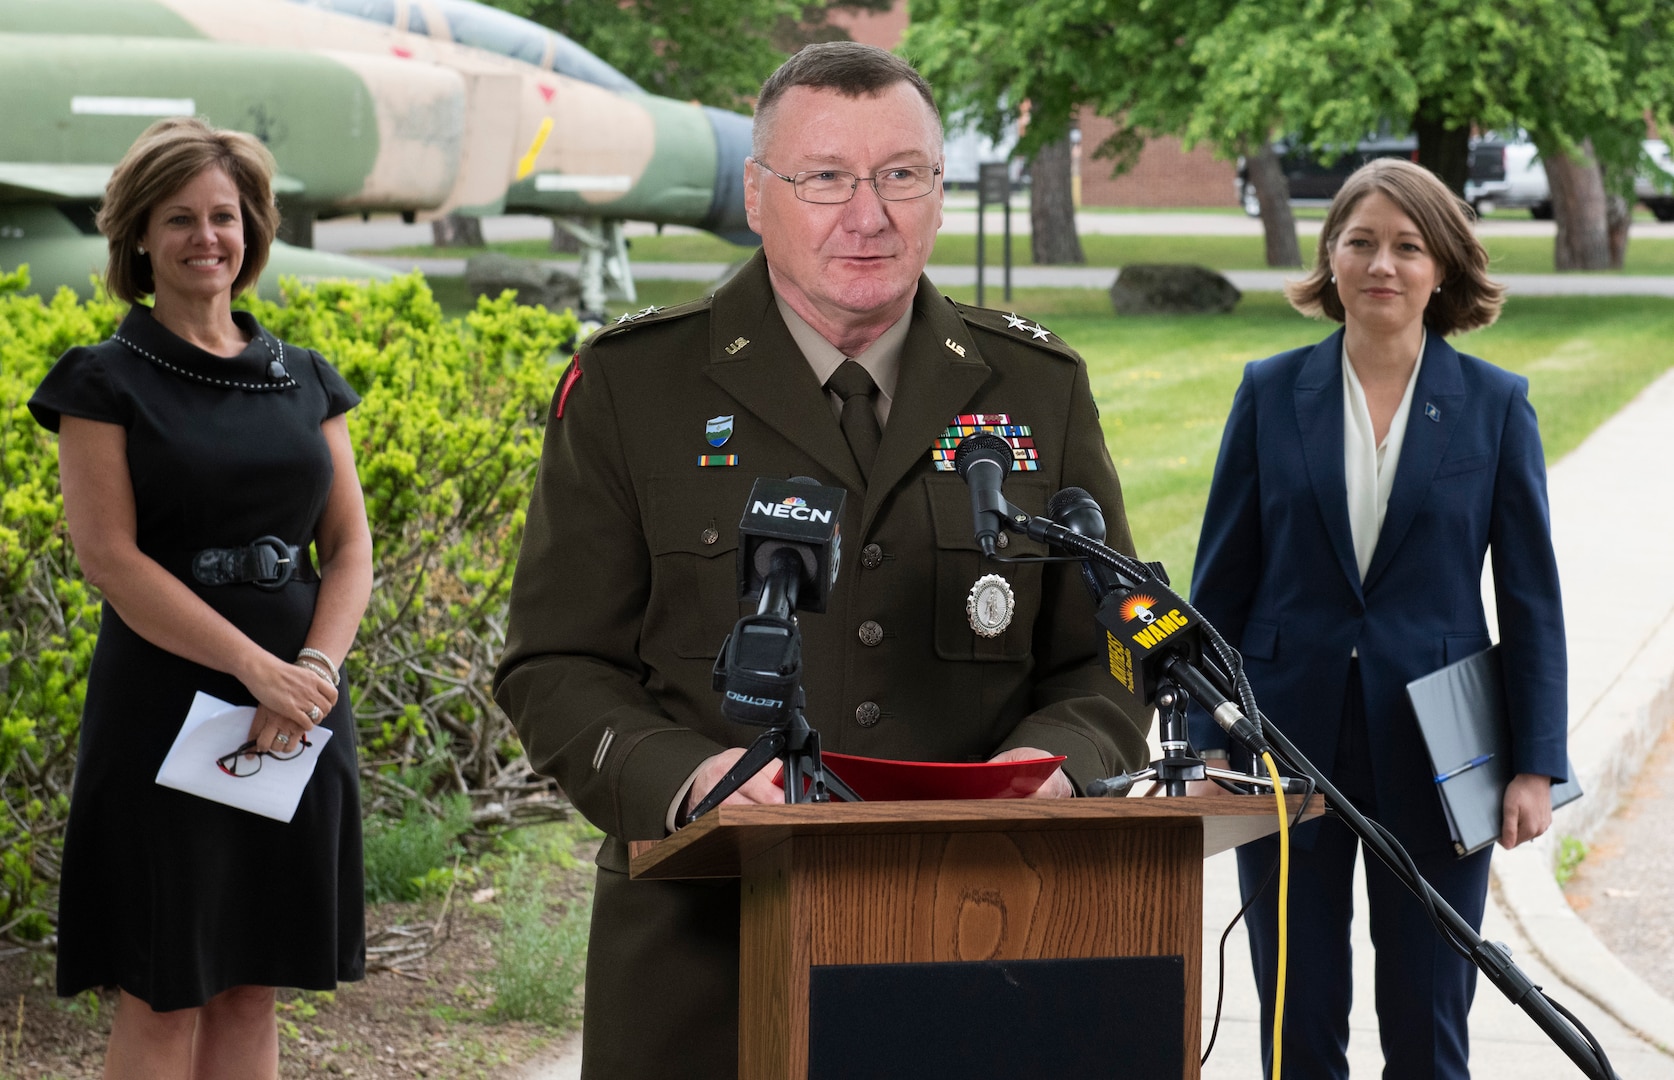 Maj. Gen. Greg Knight, Vermont's adjutant general, talks during a press conference May 27, 2021. Knight, along with Lt. Gov. Molly Gray, right, and Lindsay Kurrle, left, Vermont's secretary of commerce and community development, will spend several days in North Macedonia discussing building upon the State Partnership Program to explore economic development.